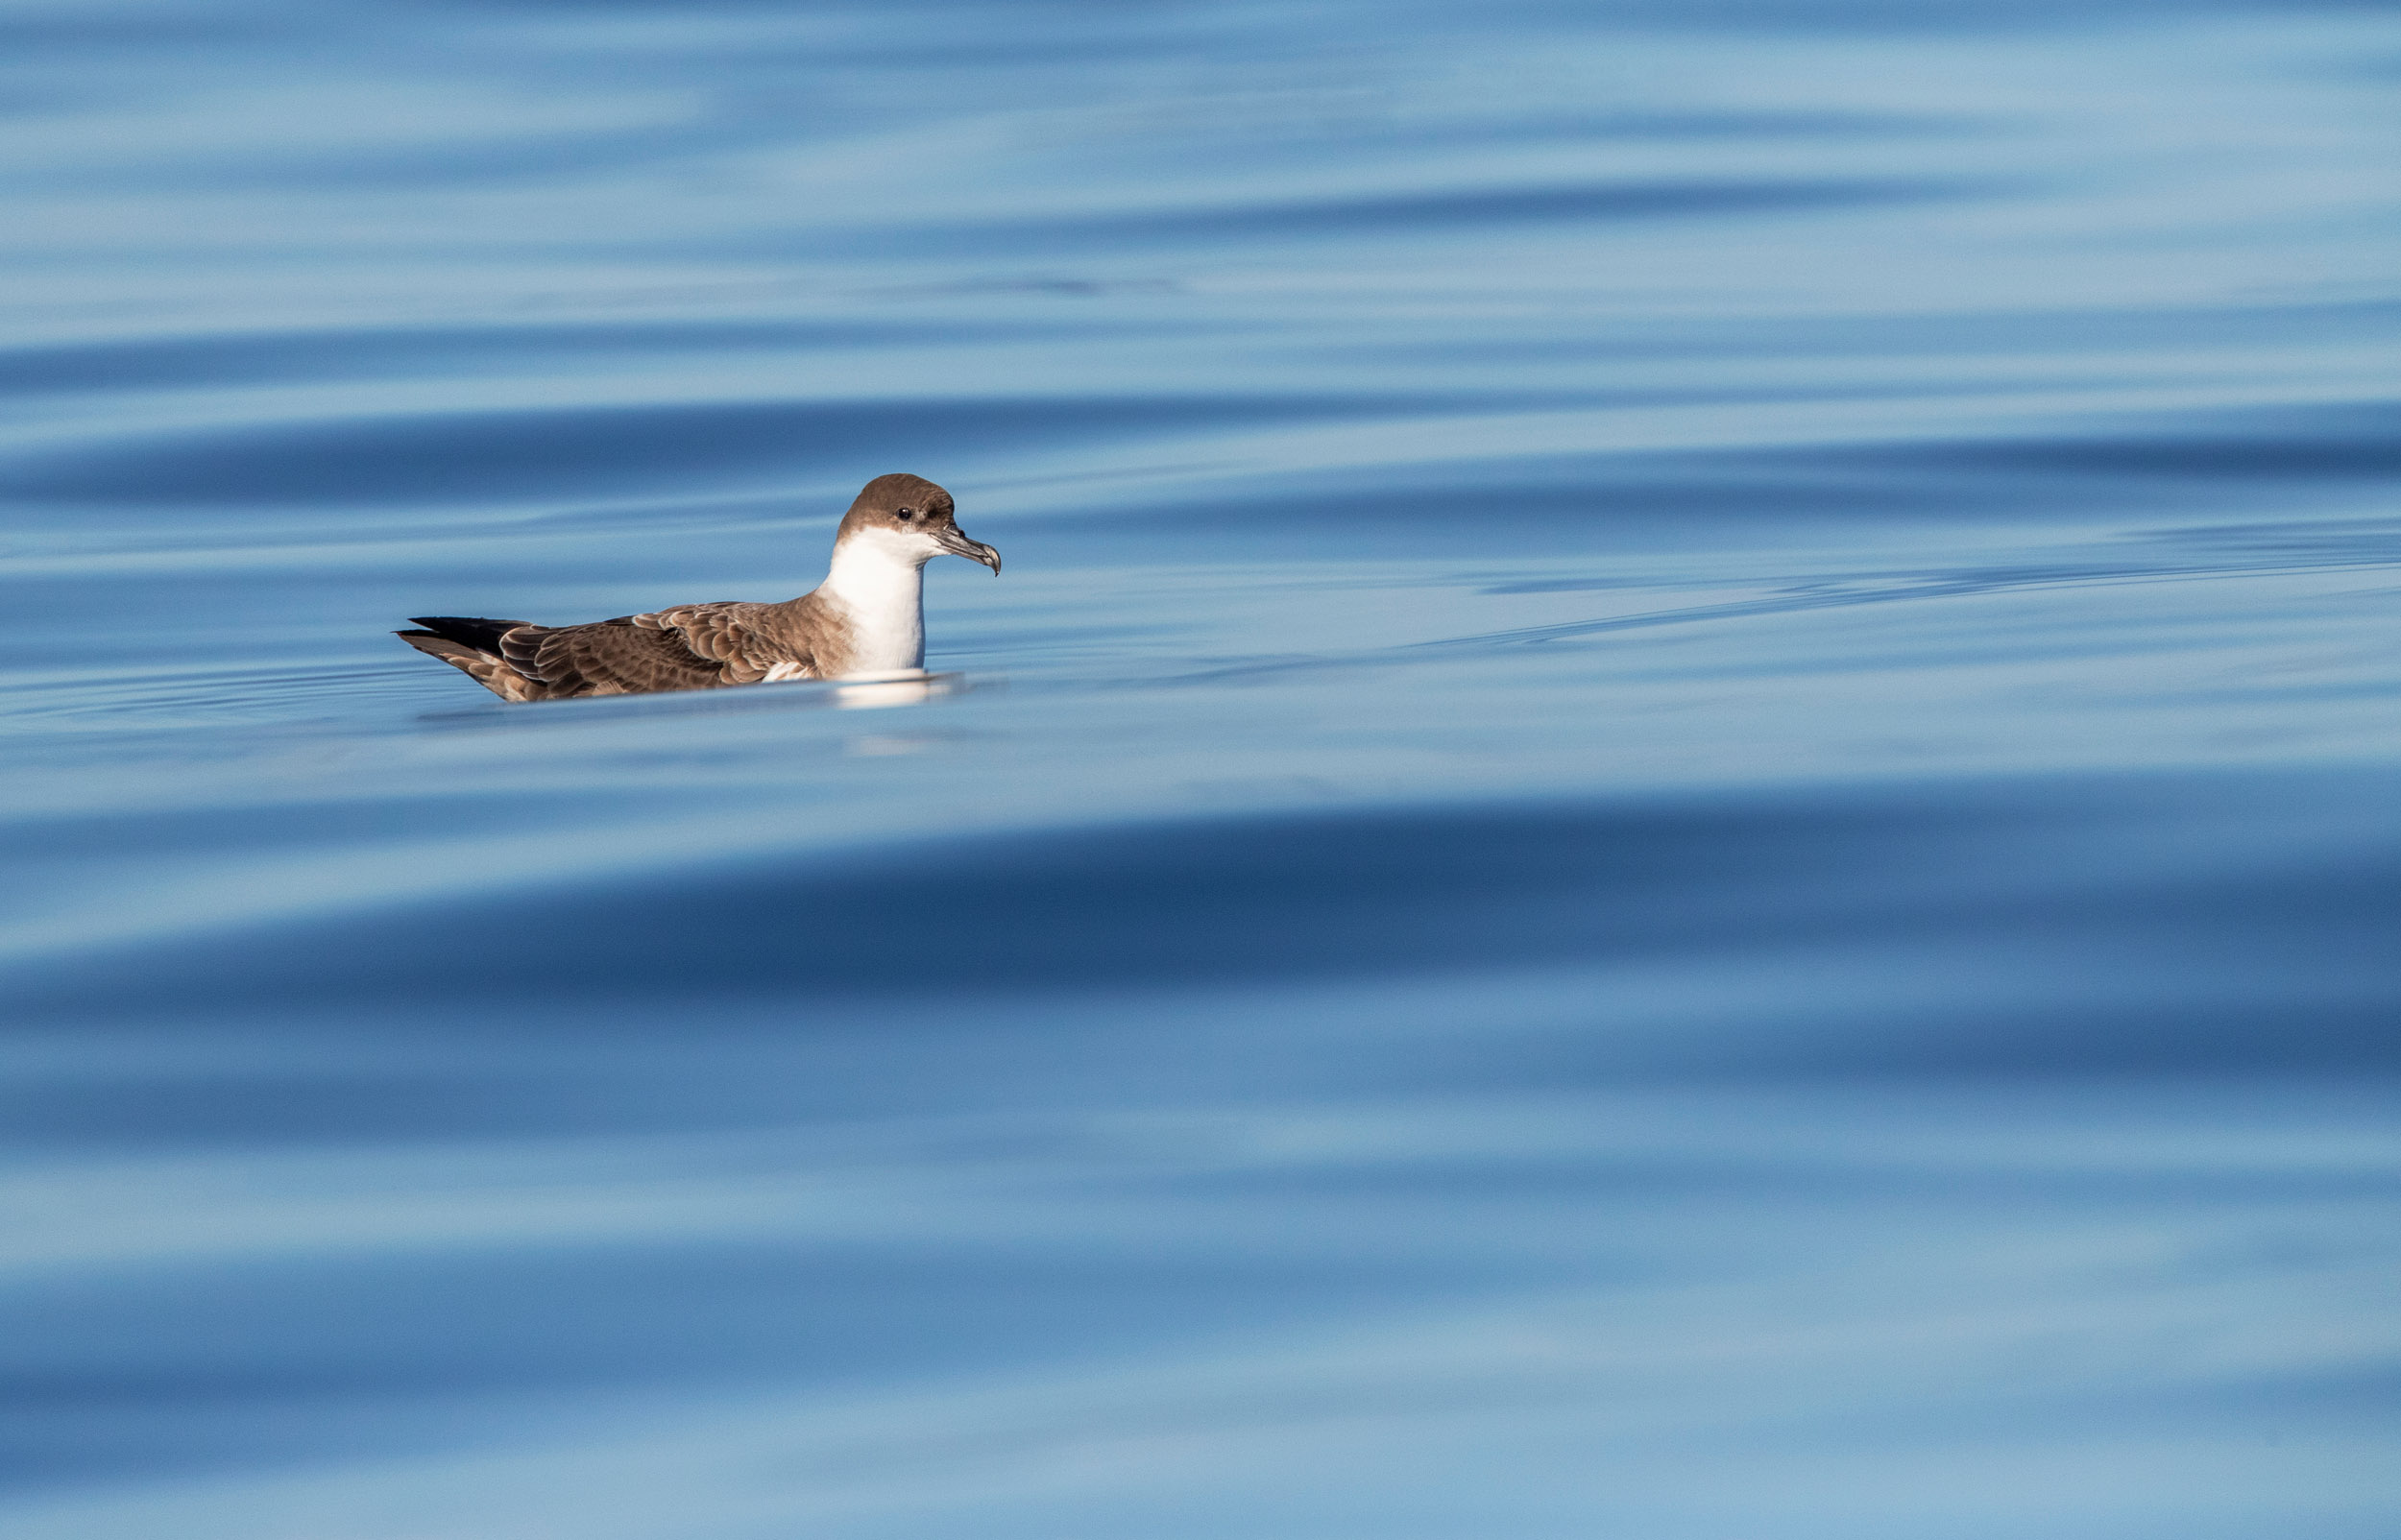 A Great Shearwater floating on a slightly wavy blue sea.